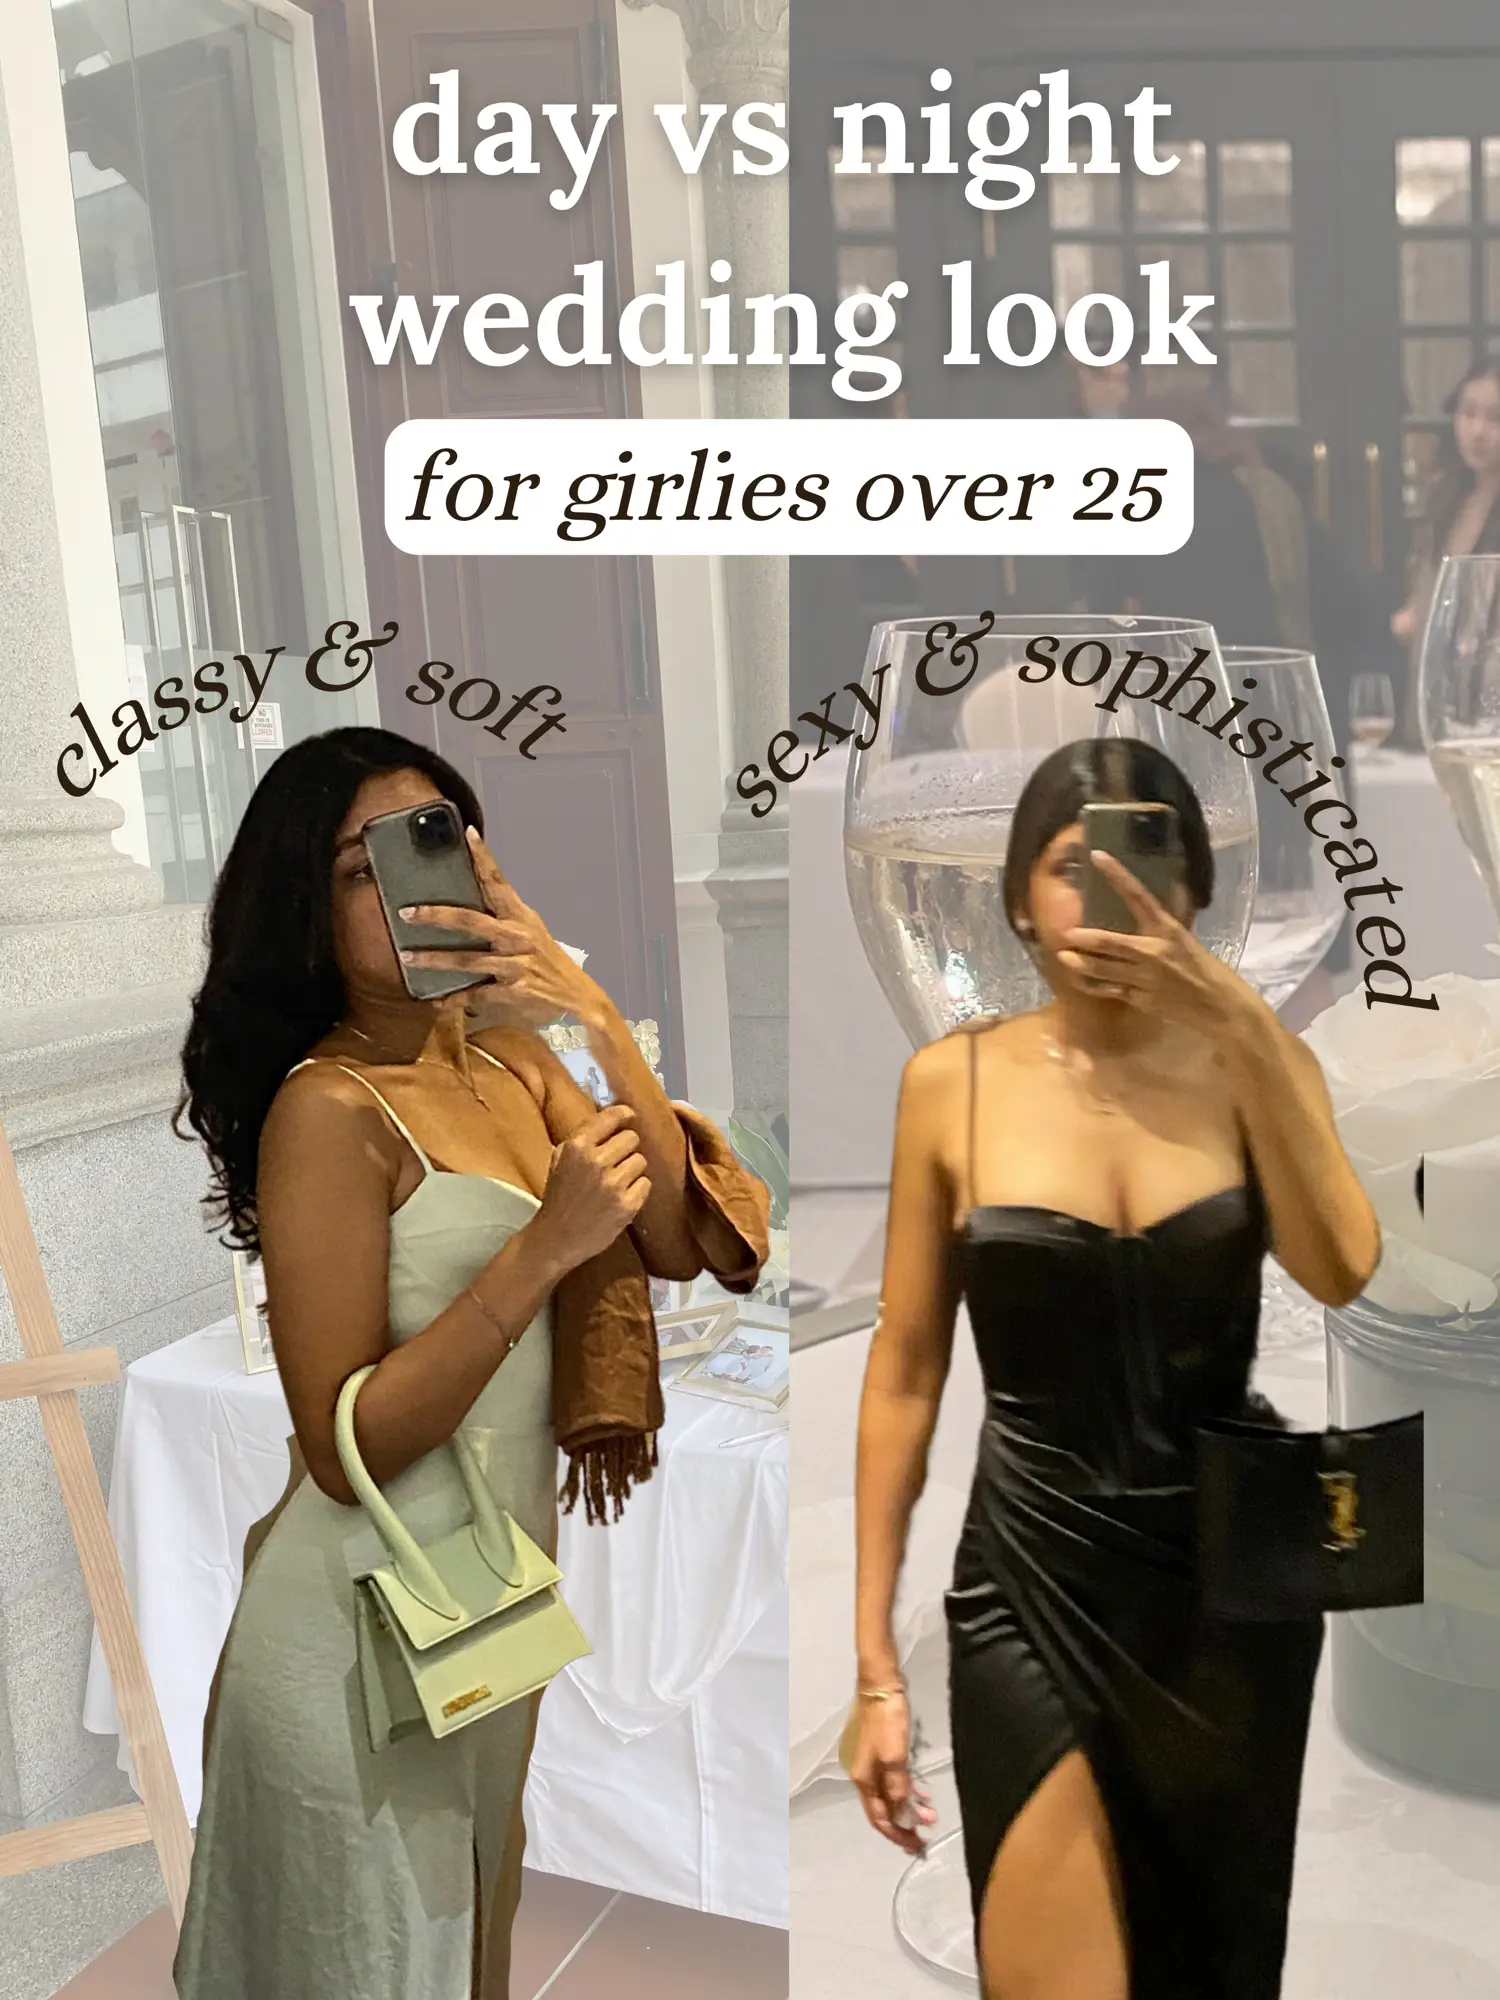 BUDGET DAY & NIGHT WEDDING LOOKS 💸👰‍♀️'s images(0)